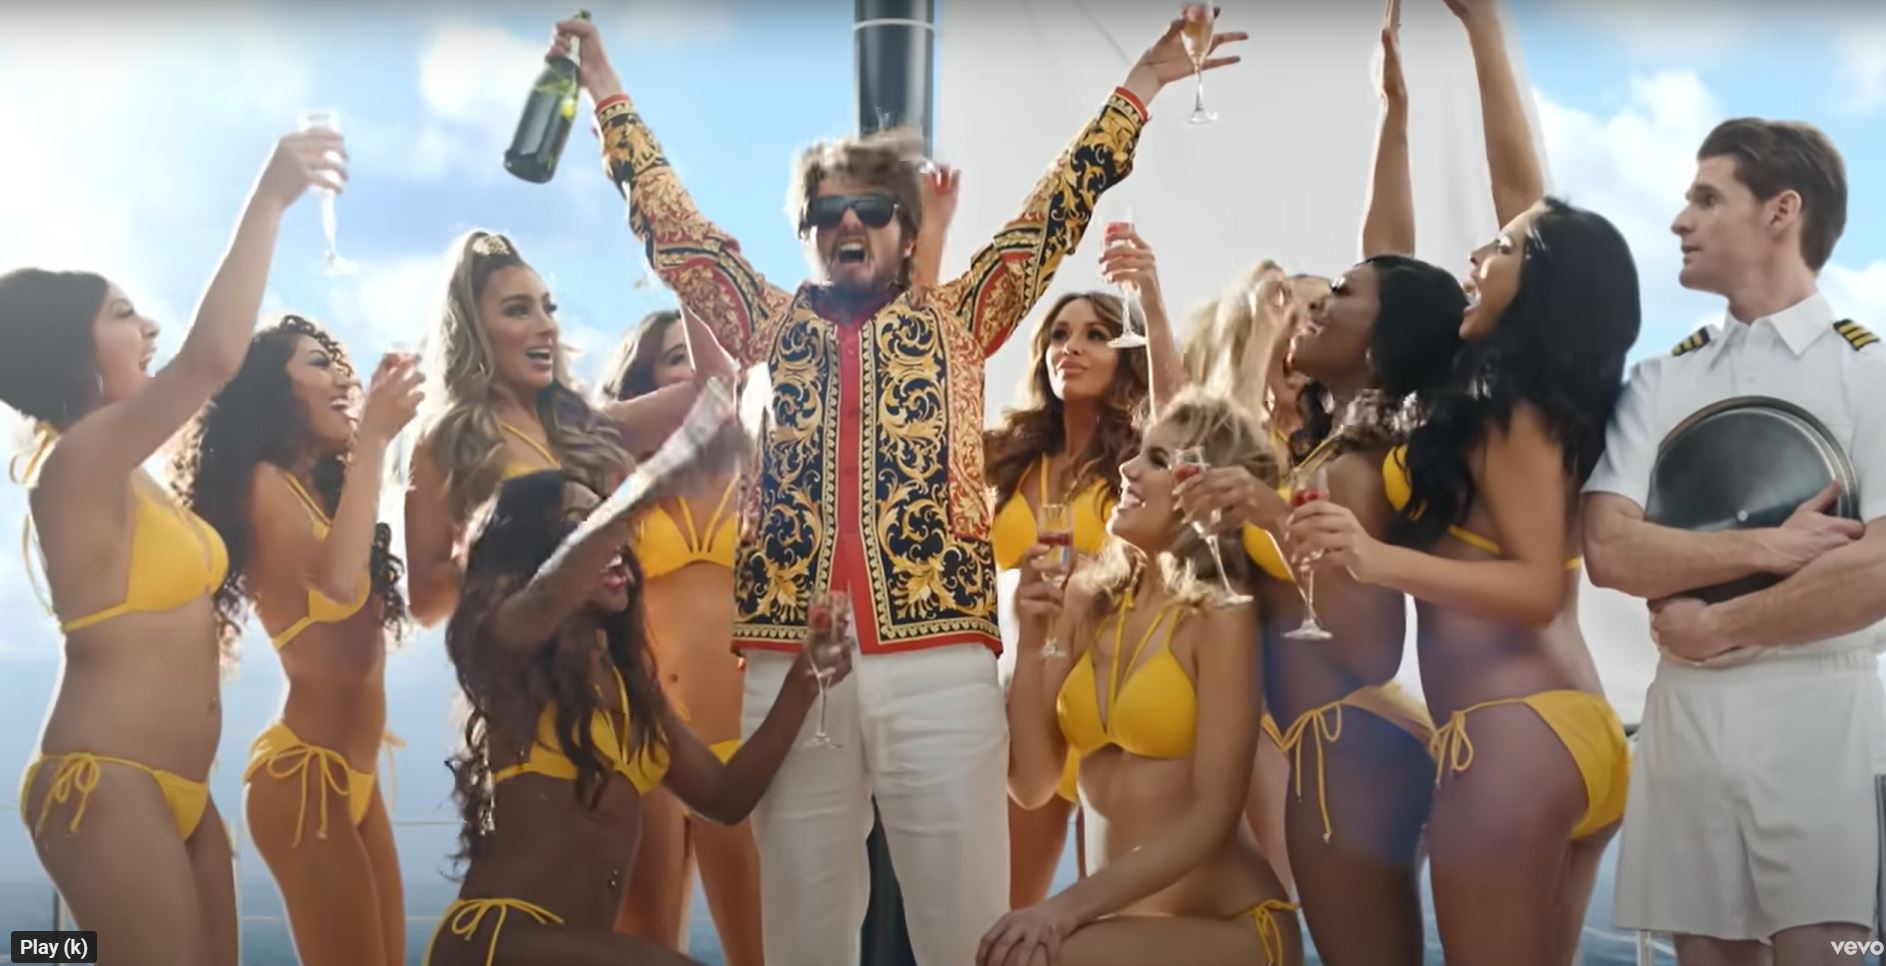 Taylor Swift's The Man video was inspired by The Wolf Of Wall Street